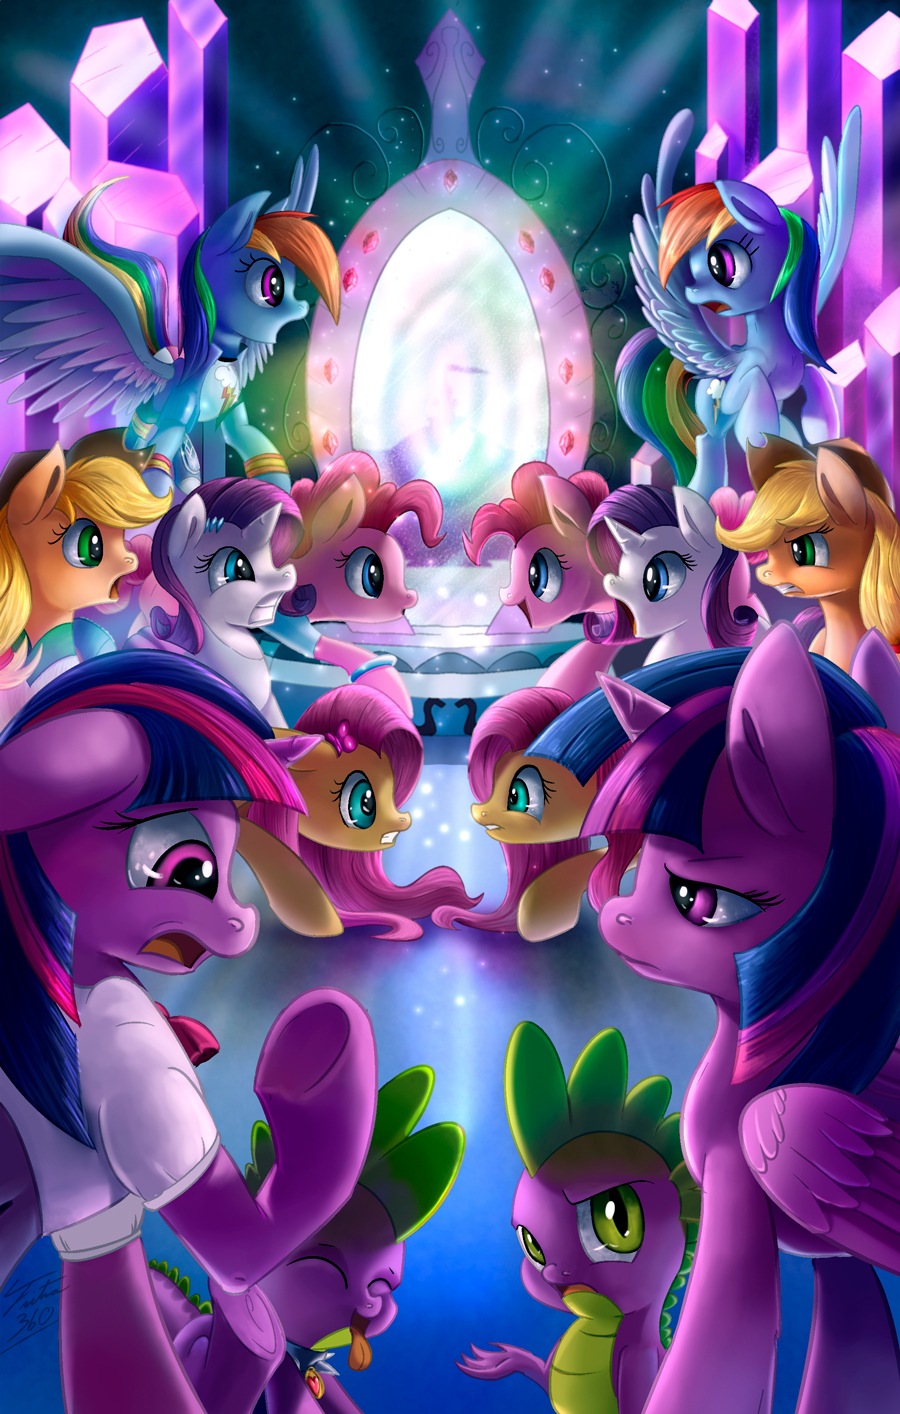 applejack_(mlp) arthropod blonde_hair blue_eyes butterfly clothing collar cowboy_hat equestria_girls equine female fluttershy_(mlp) friendship_is_magic group hair hair_pin hairpin hat horn horse insect mammal mirror my_little_pony pegasus pink_hair pinkie_pie_(mlp) pony portal purple_hair rainbow_dash_(mlp) rarity_(mlp) scared scratching sparkles spike_(mlp) tongue tongue_out tsitra360 twilight_sparkle_(mlp) unicorn winged_unicorn wings